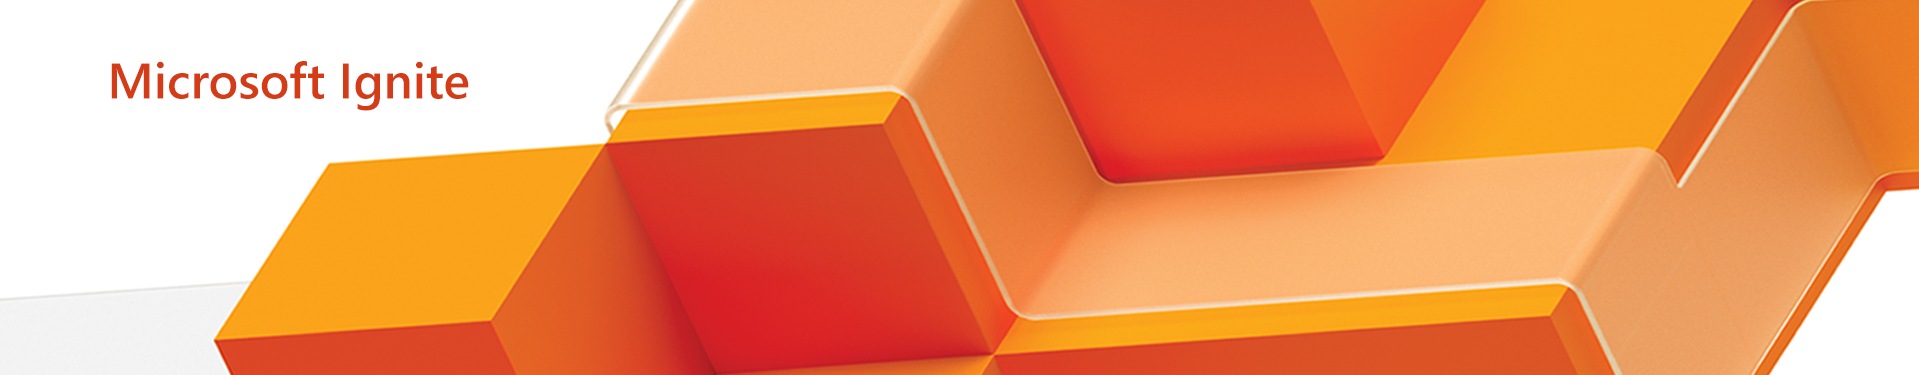 Microsoft Ignite event graphic composed of a bright orange geometric pattern with a clear band forming a path over the top